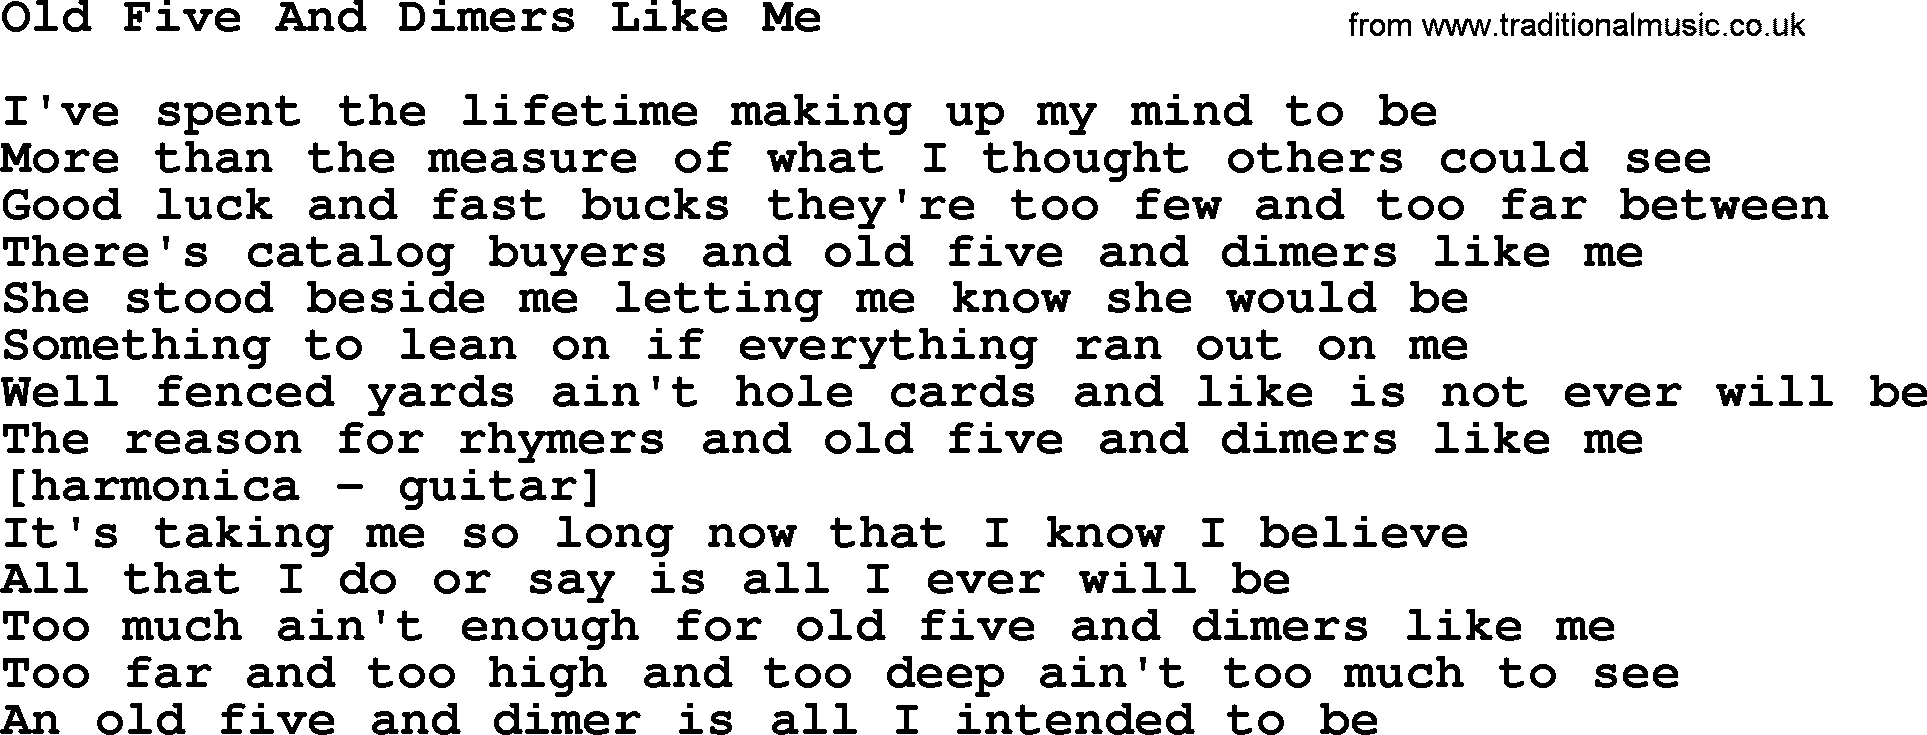 Willie Nelson song: Old Five And Dimers Like Me lyrics